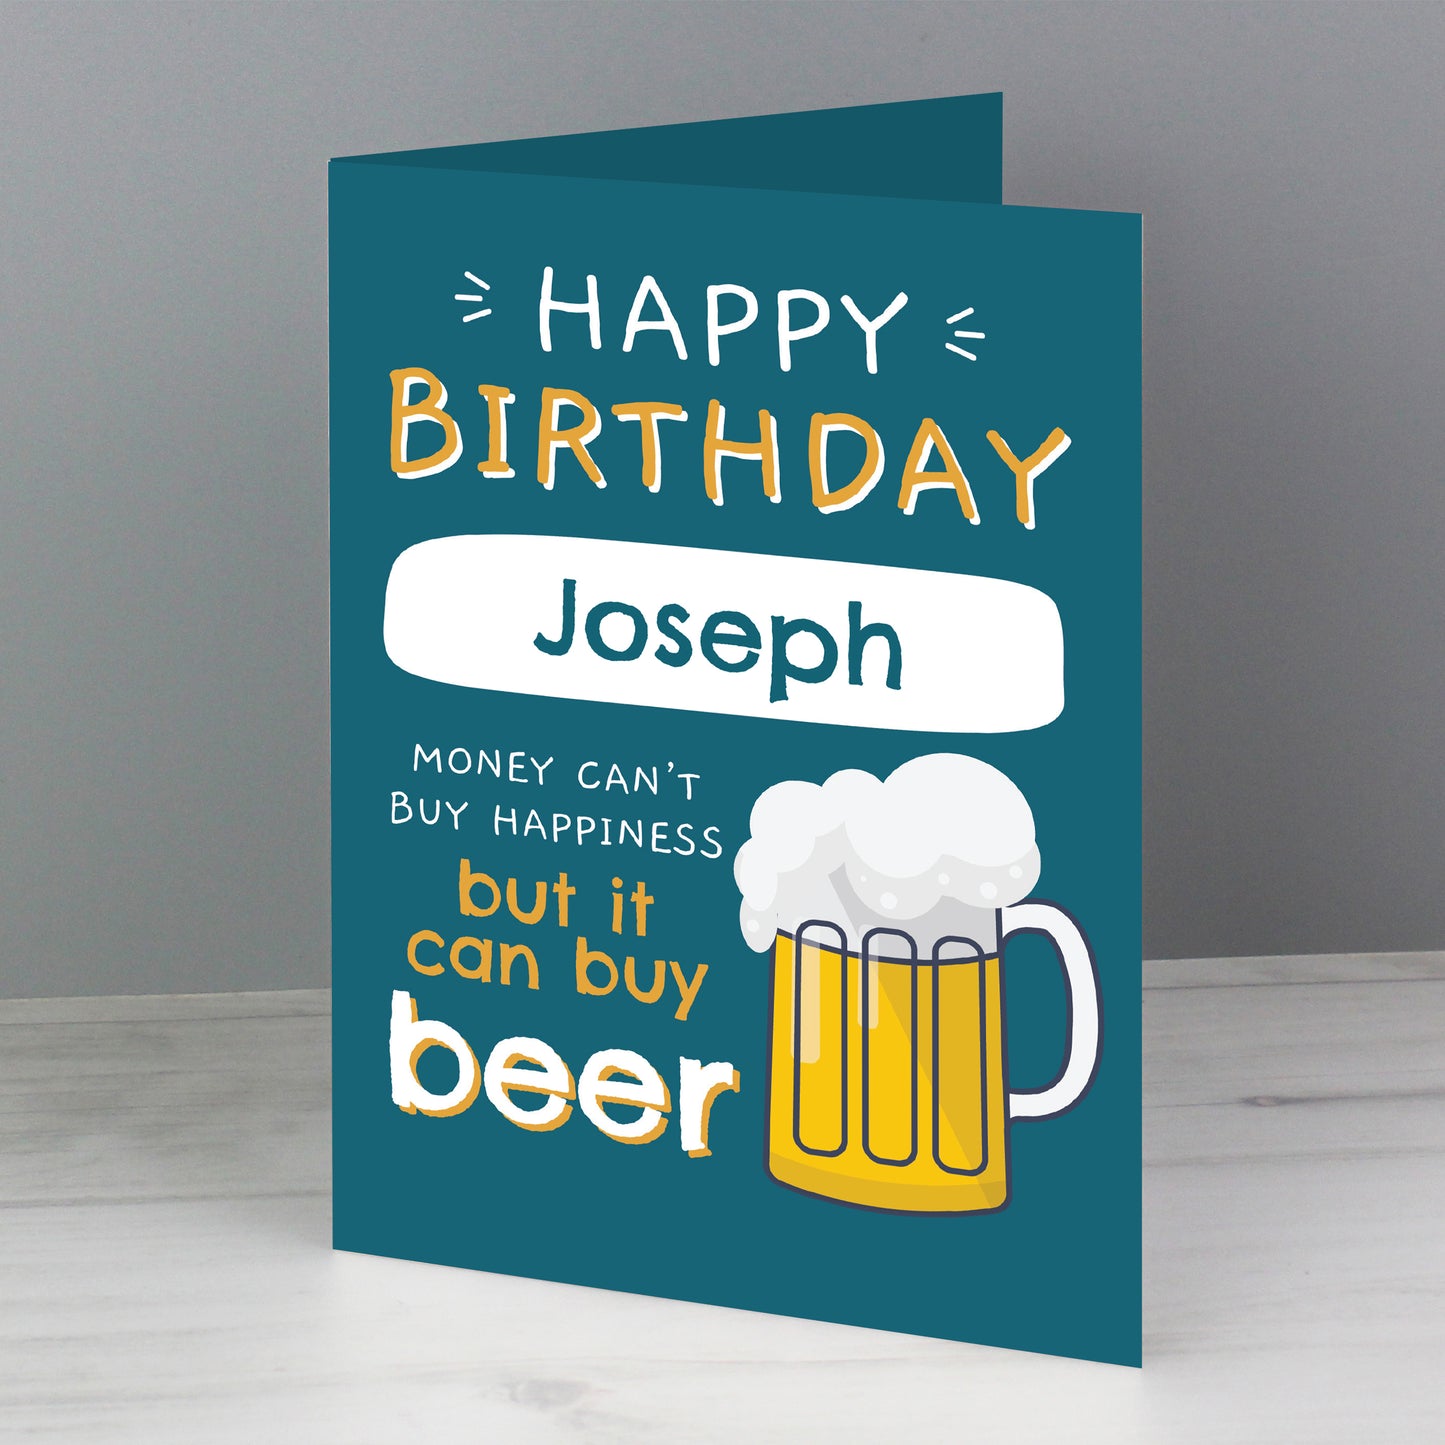 Personalised Happy Birthday Beer Card Add Any Name - Personalise It!